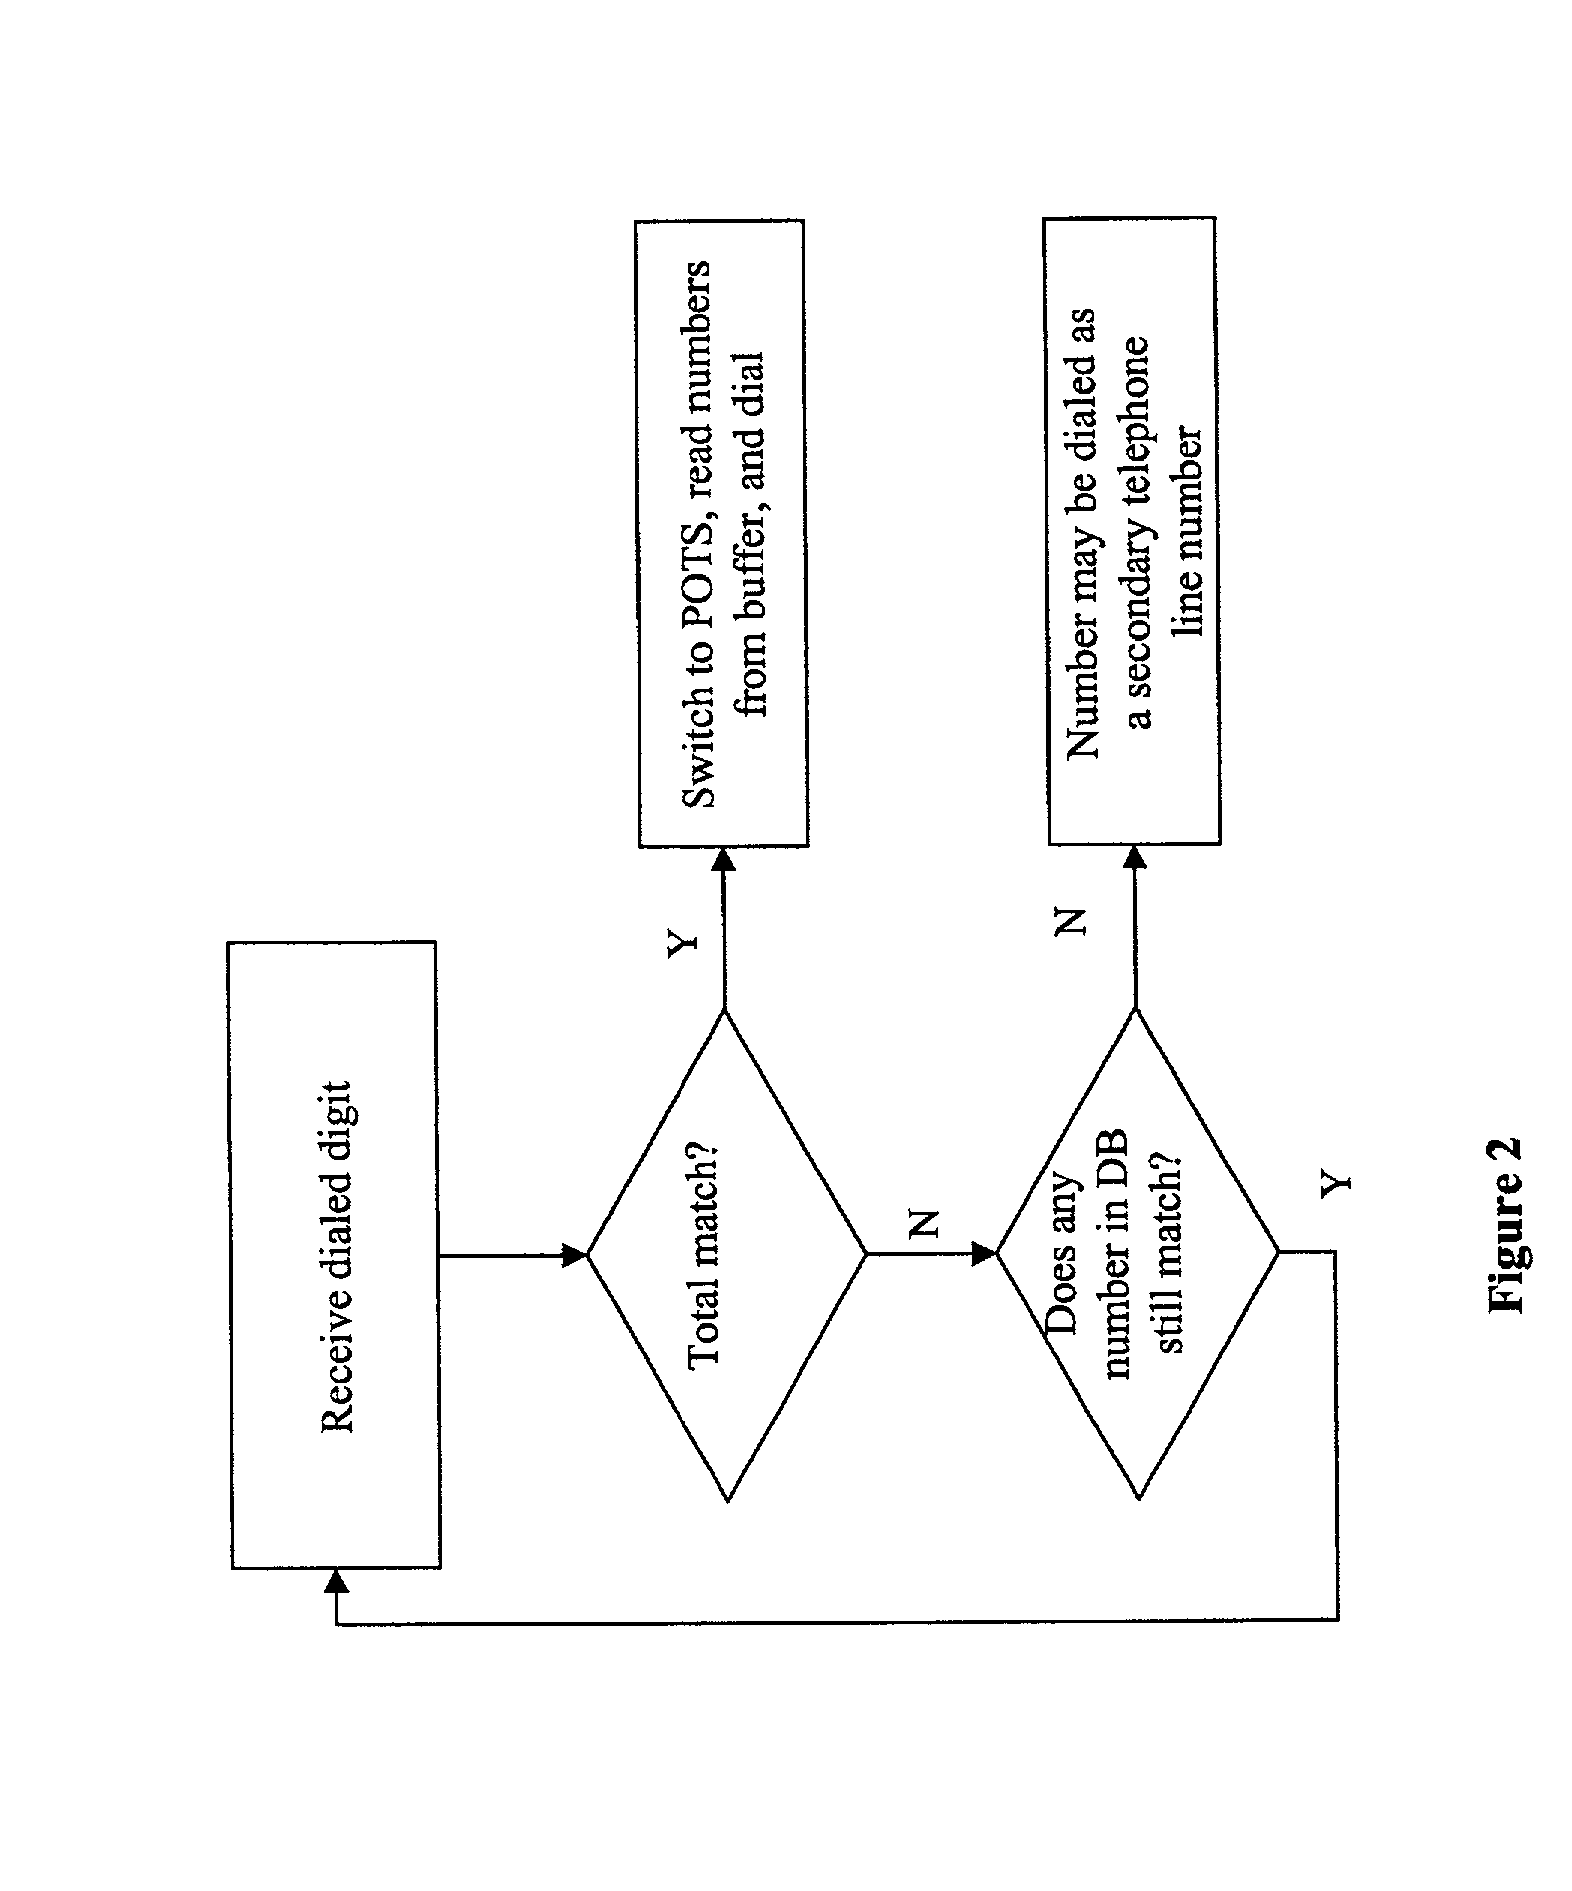 Secondary subscriber line override system and method